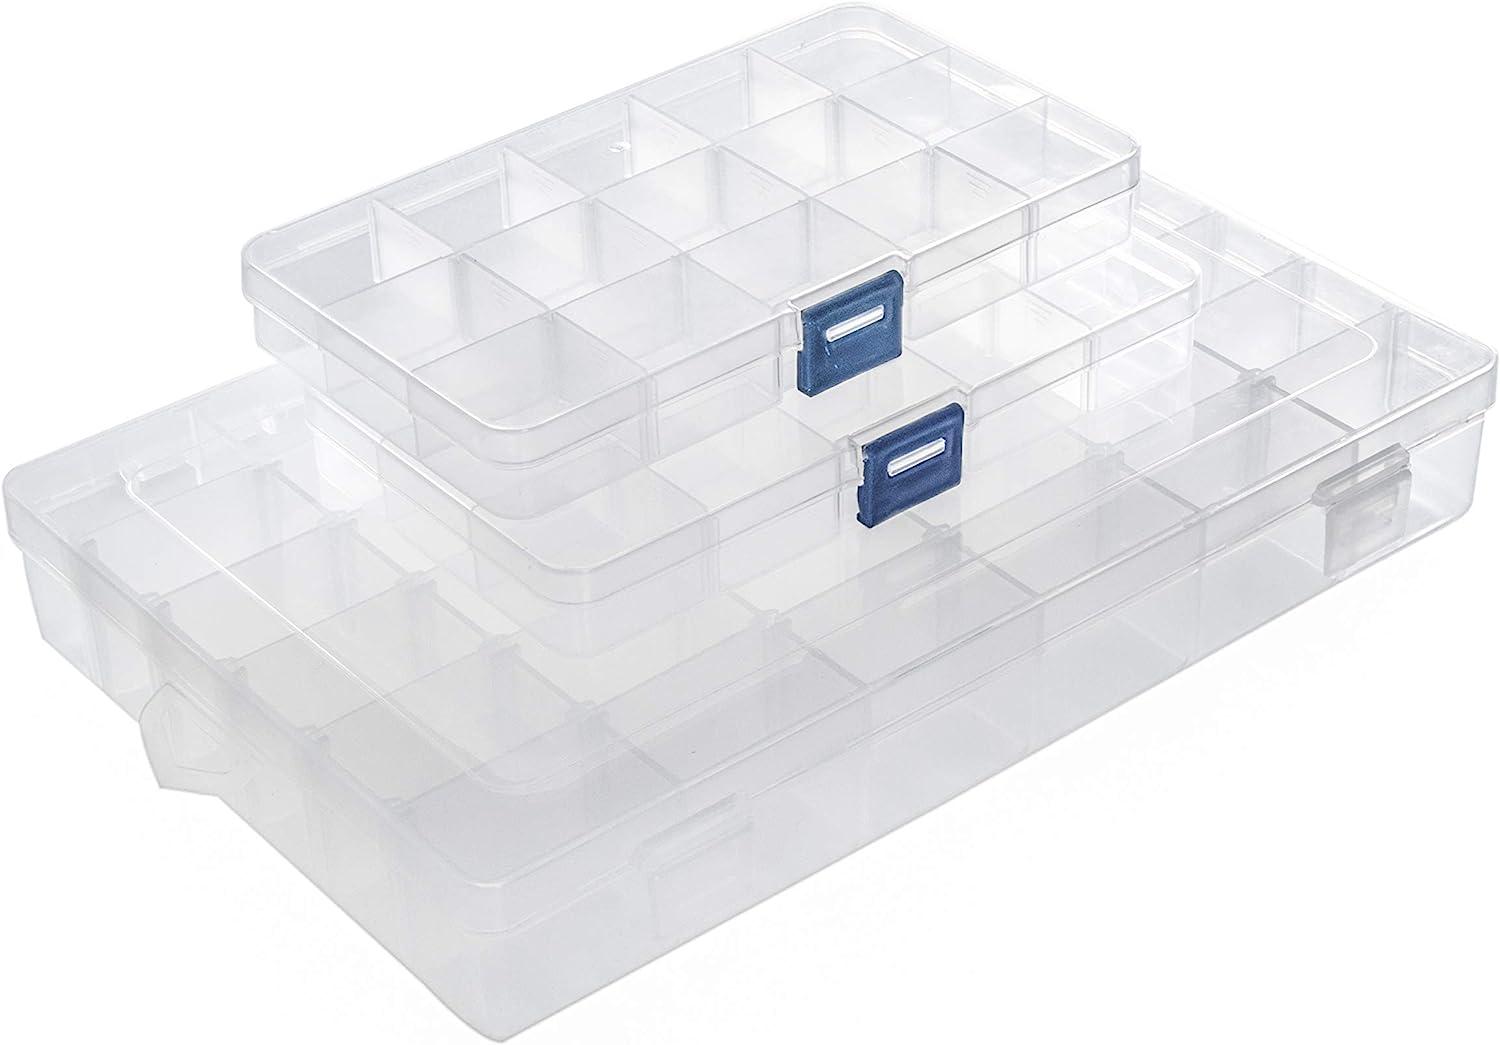 Snowkingdom Plastic Grid Box Storage Organizer Case for Display Collection  with Adjustable Dividers - 3 Pack (1pc 36 Grids + 2pc 15 Grids) - Free  Letter Stickers 36 Grid+2* 15 Grid